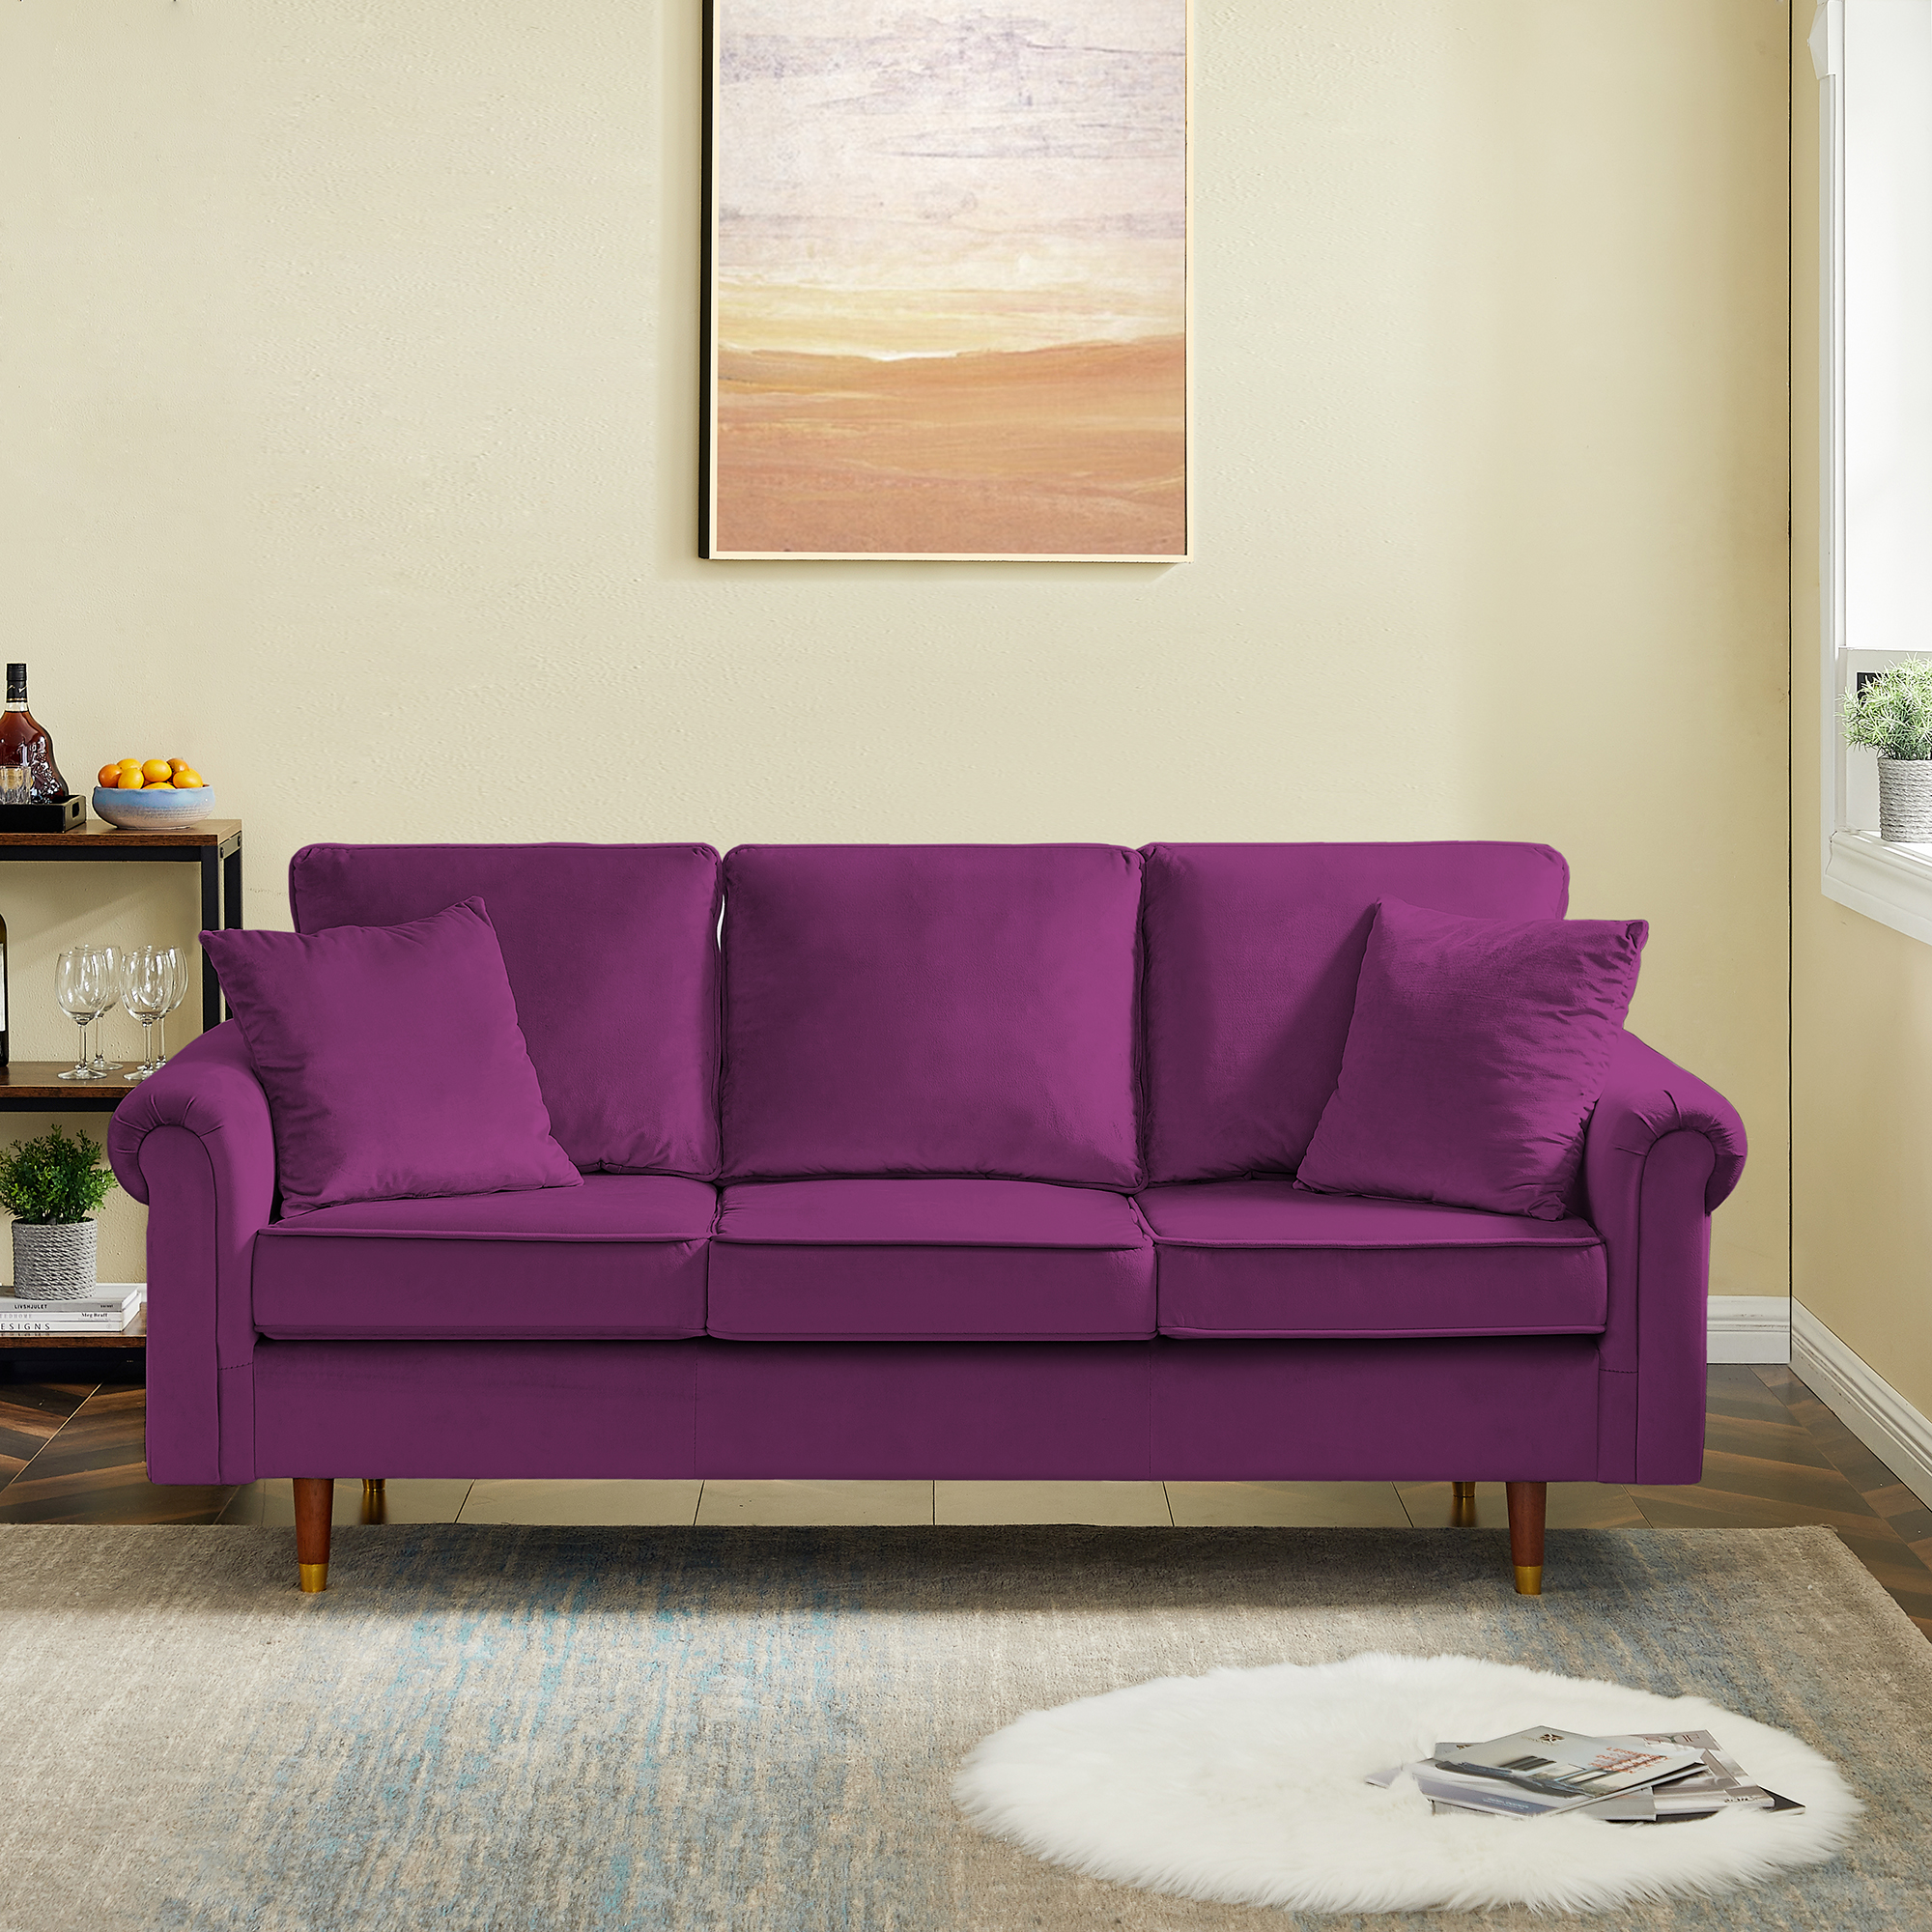 Velvet Sofa Couch with 2 Pillows, Modern 3 Seater Sofa With Wood Legs for Living Room and Bedroom .-Boyel Living